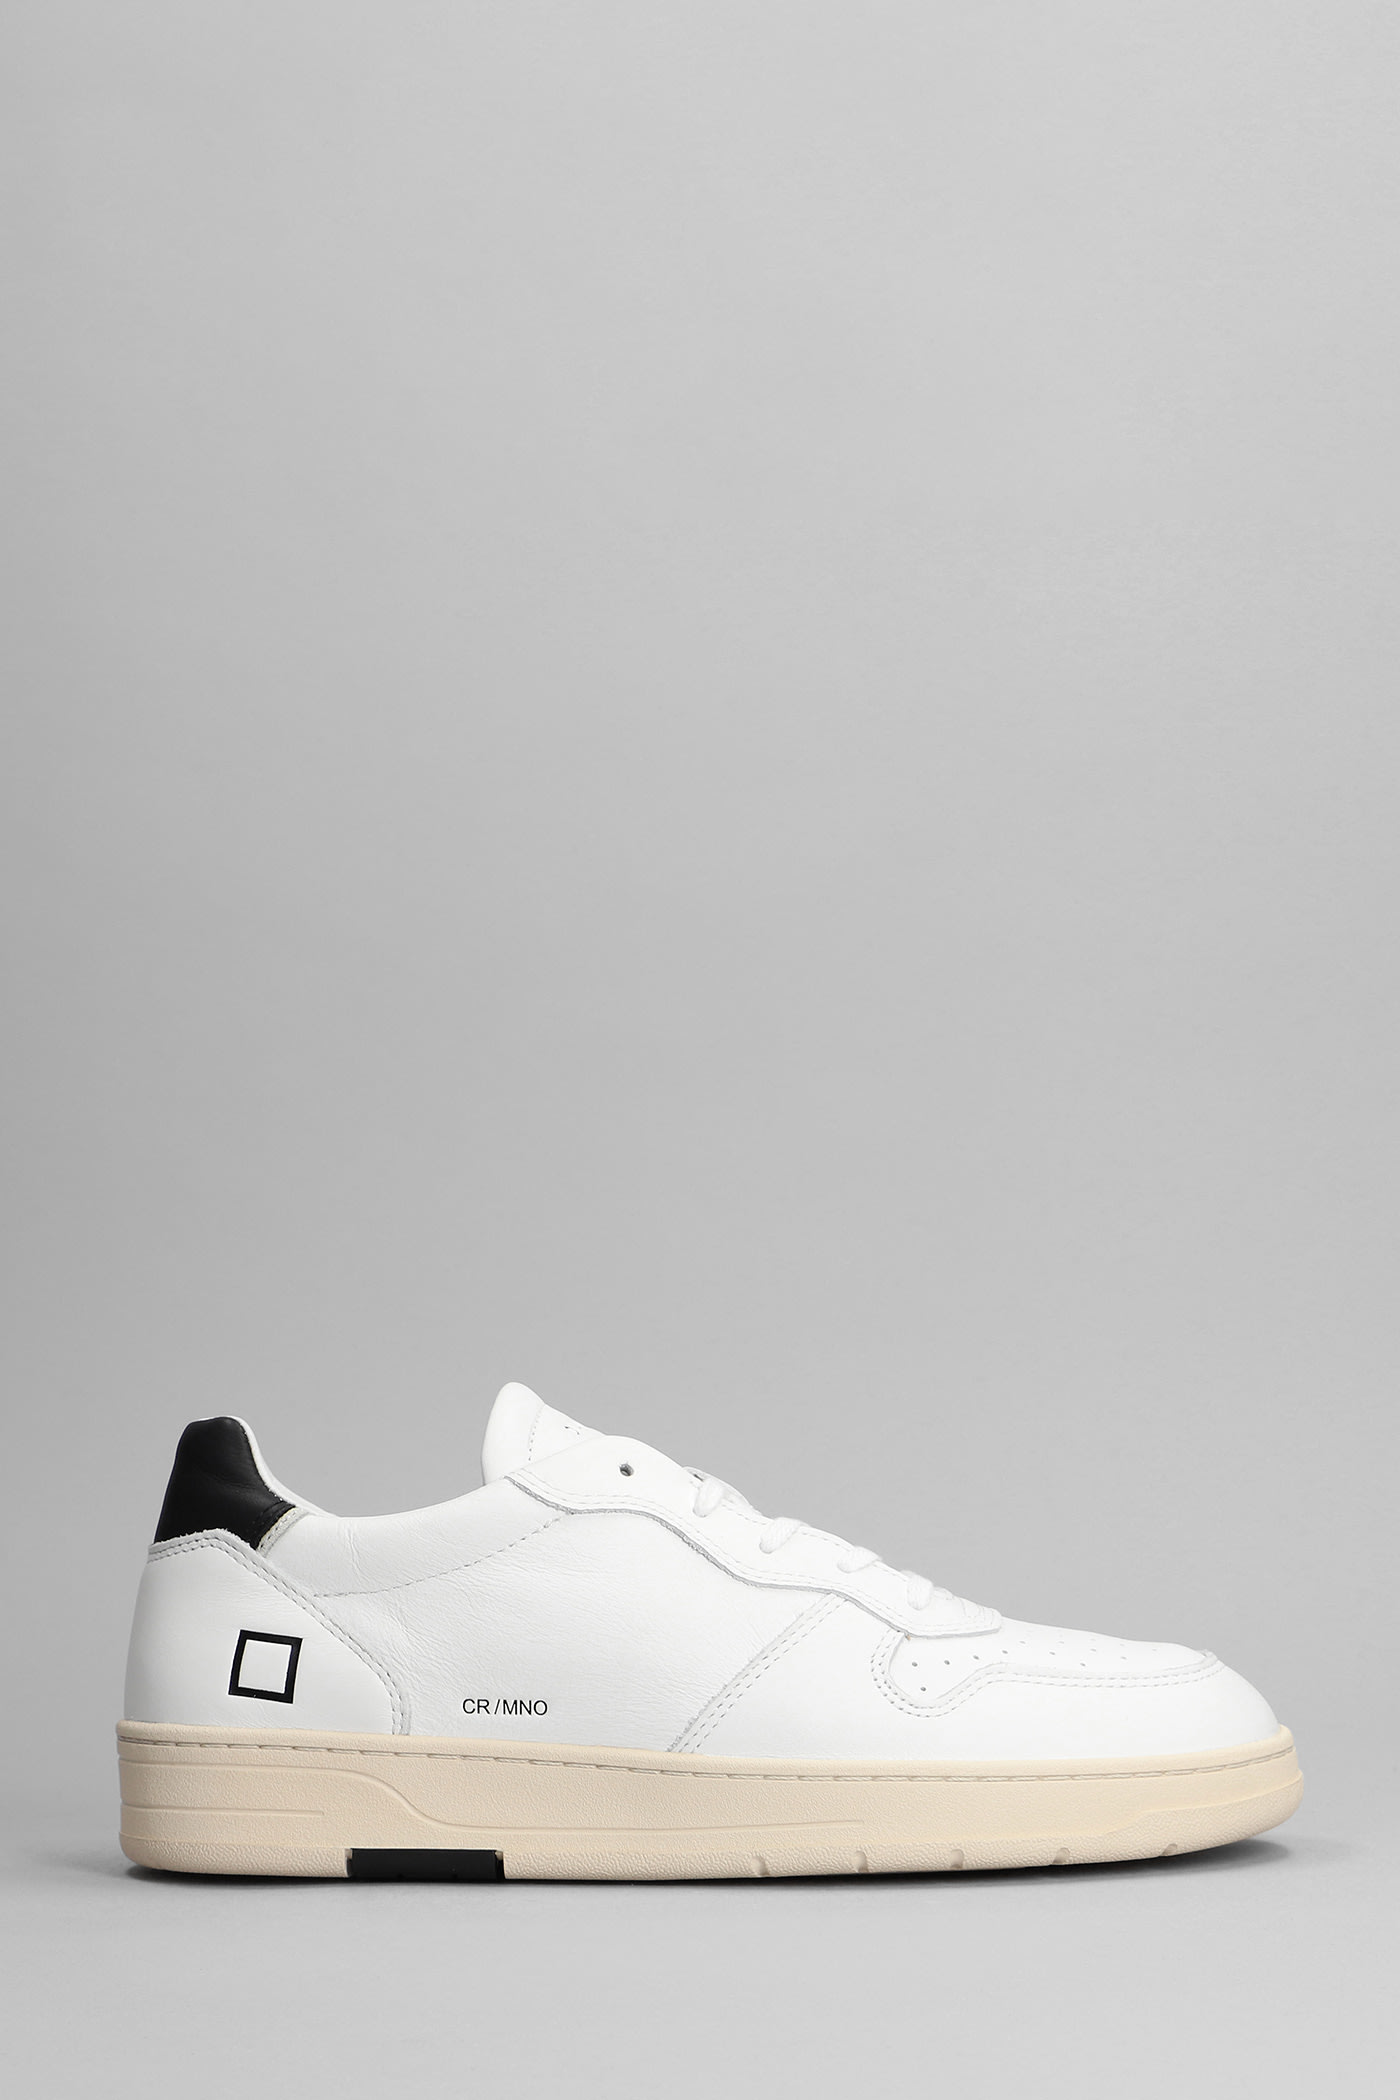 D.A.T.E. Court Mono Sneakers In White Leather